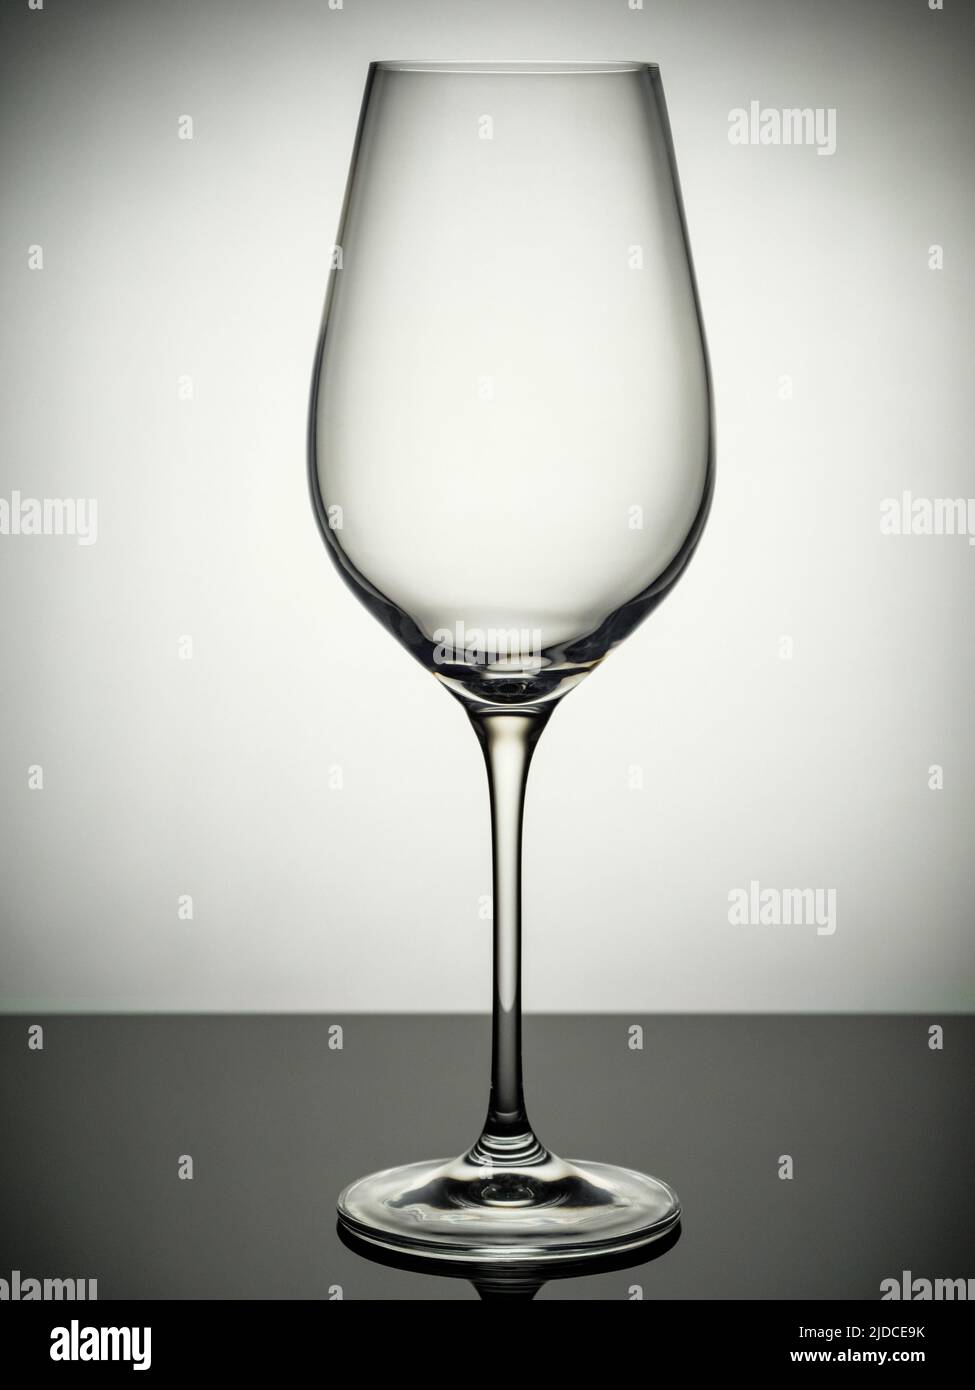 An empty champagne glass stands on a gray table Stock Photo